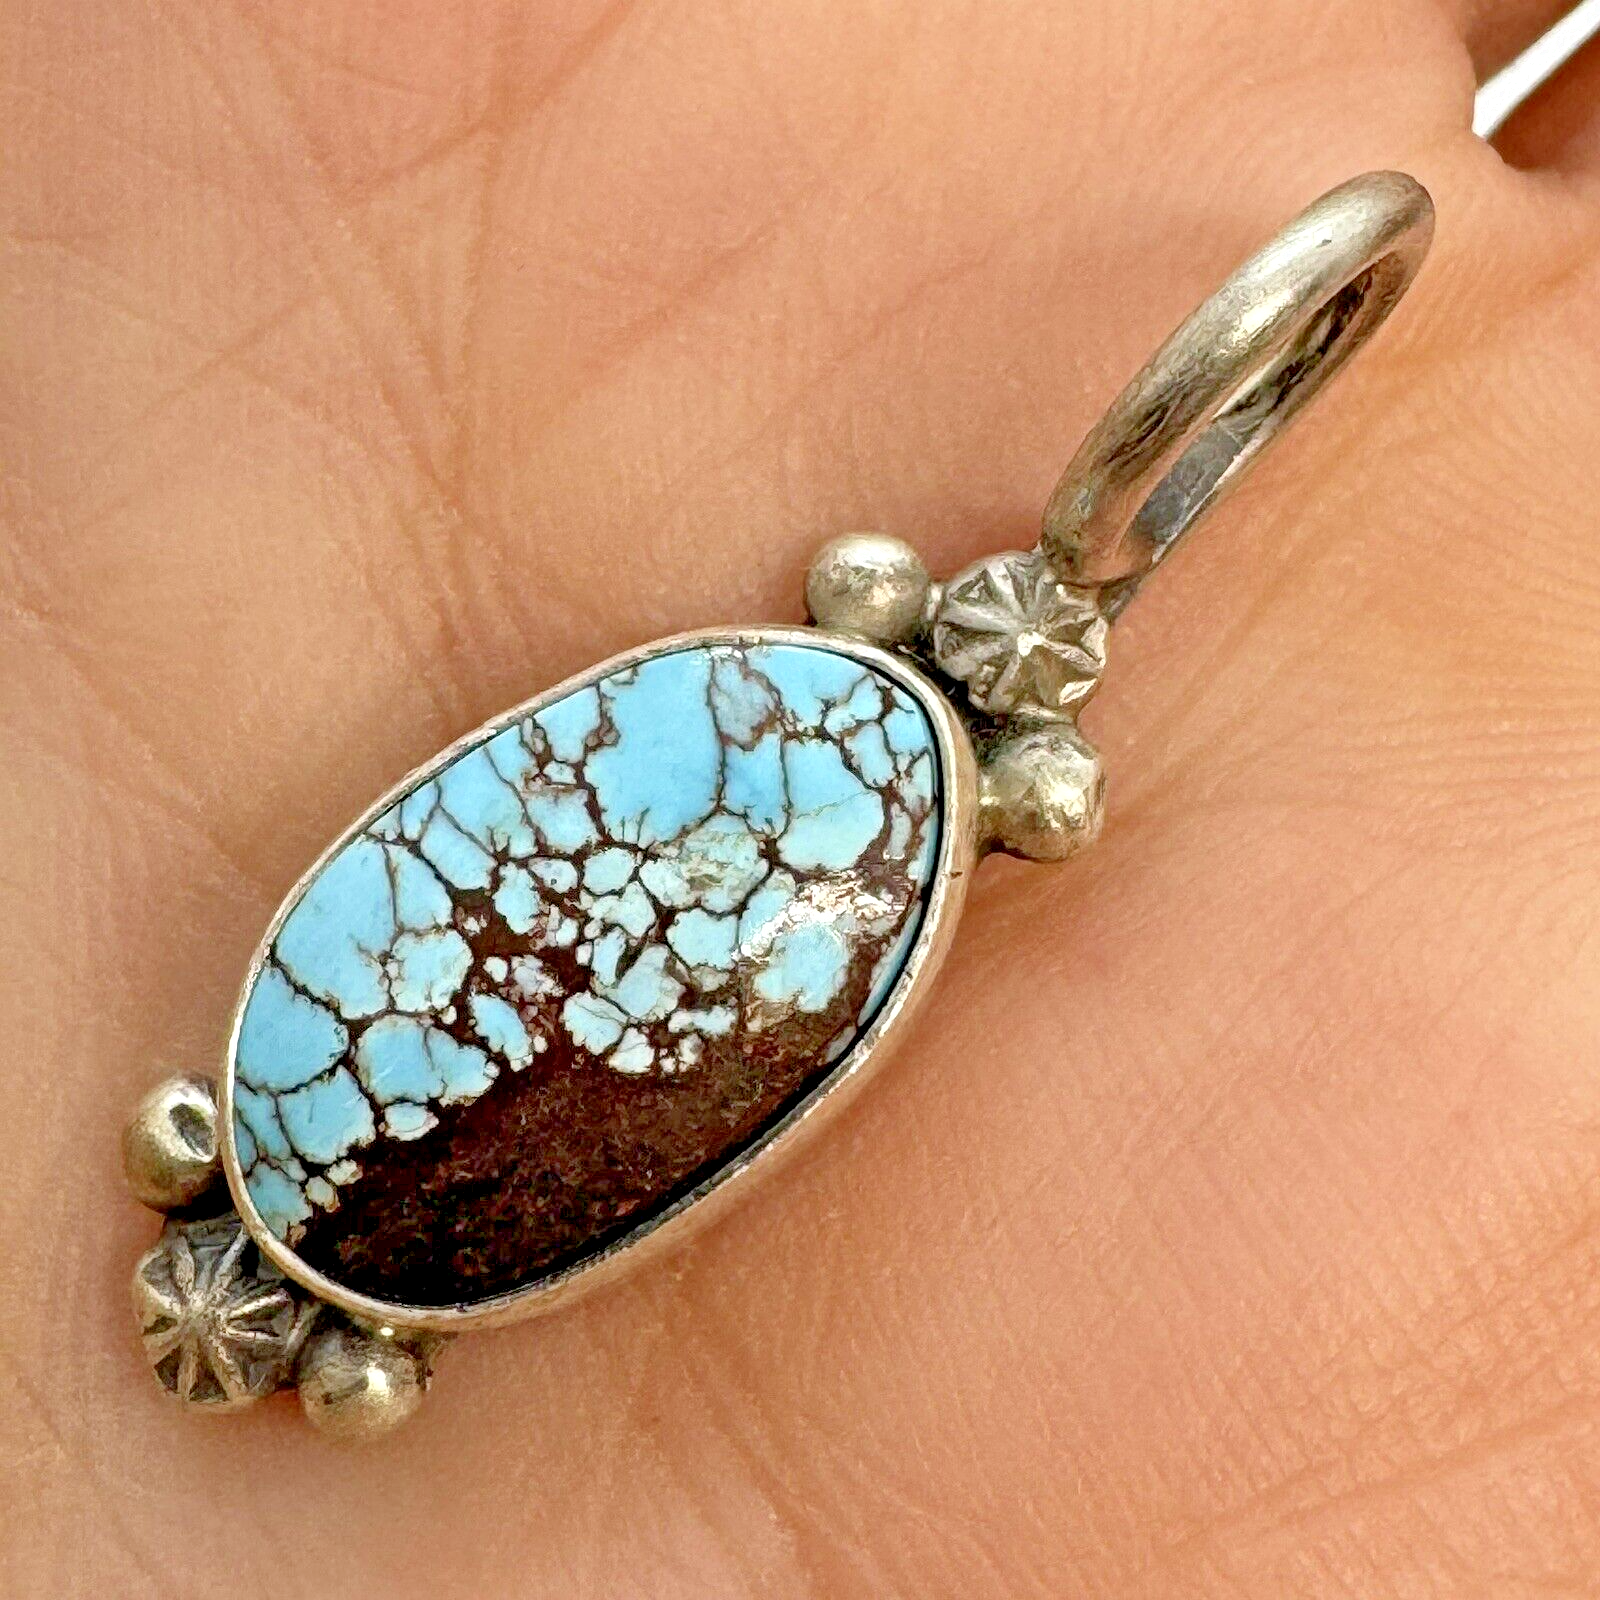 Navajo Golden Hills Turquoise Pendant Sterling Silver 4.2g by Anderson Largo Native American